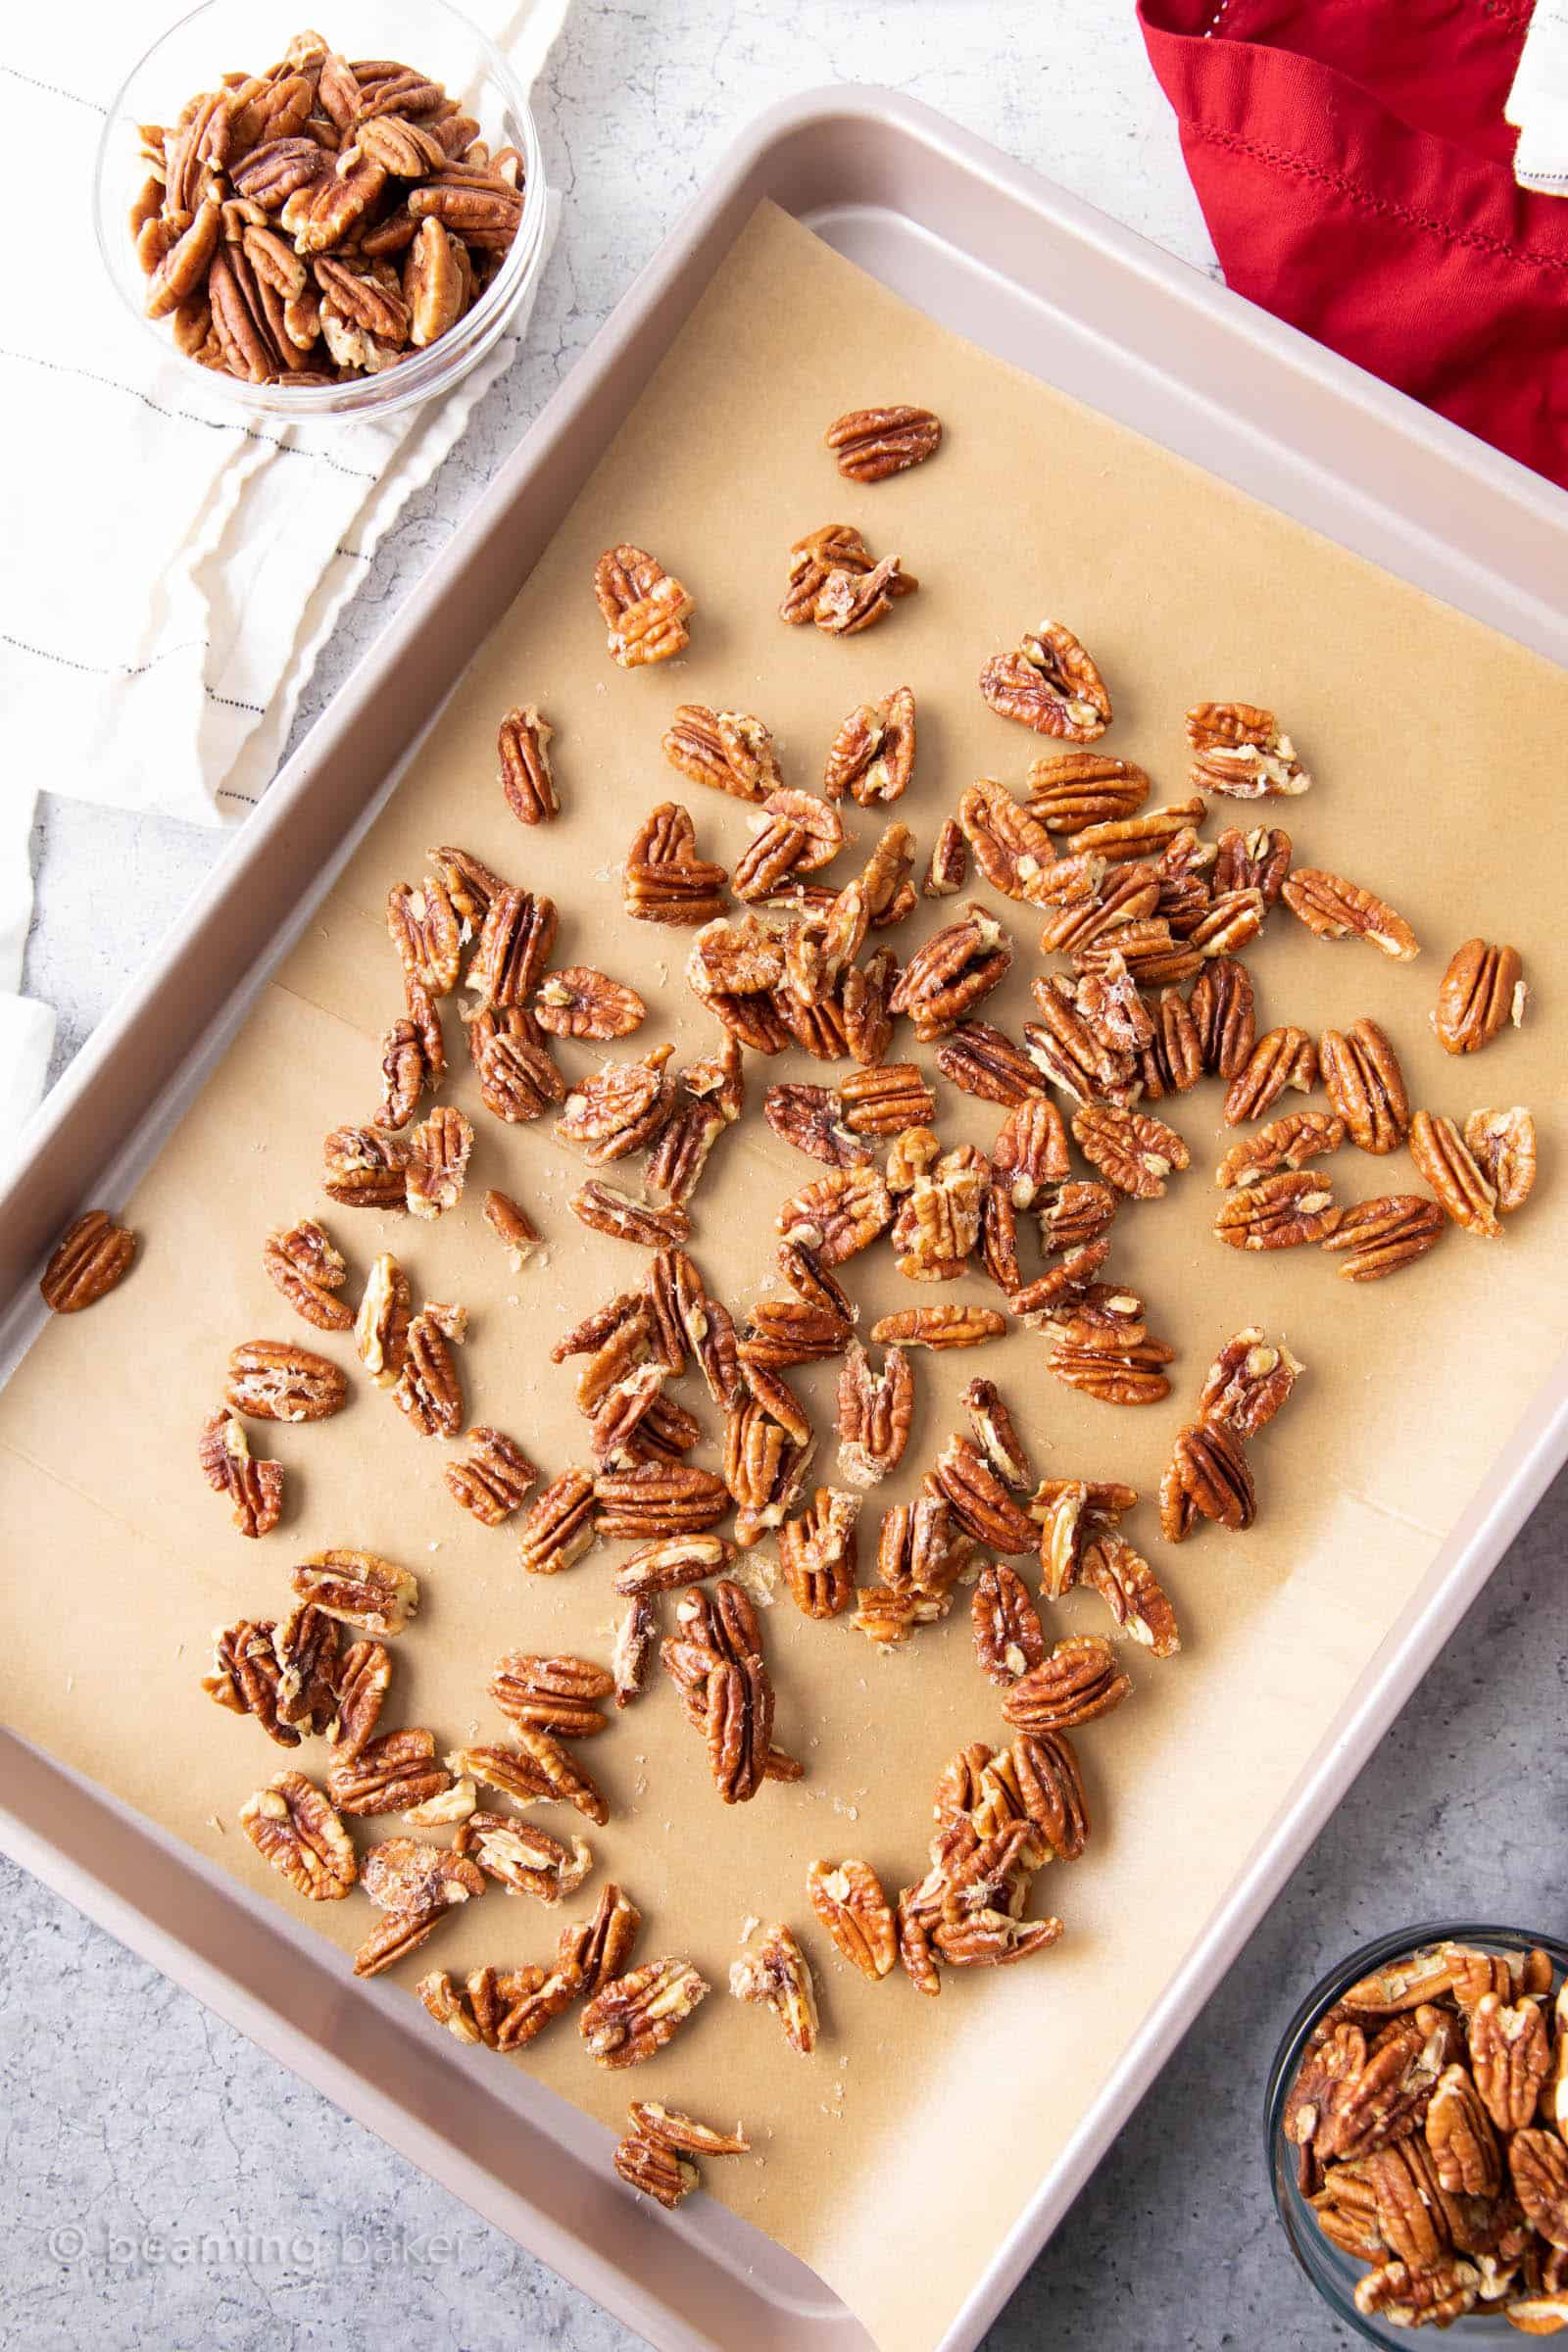 Baking workstation with keto candied pecans cooling on the baking sheet